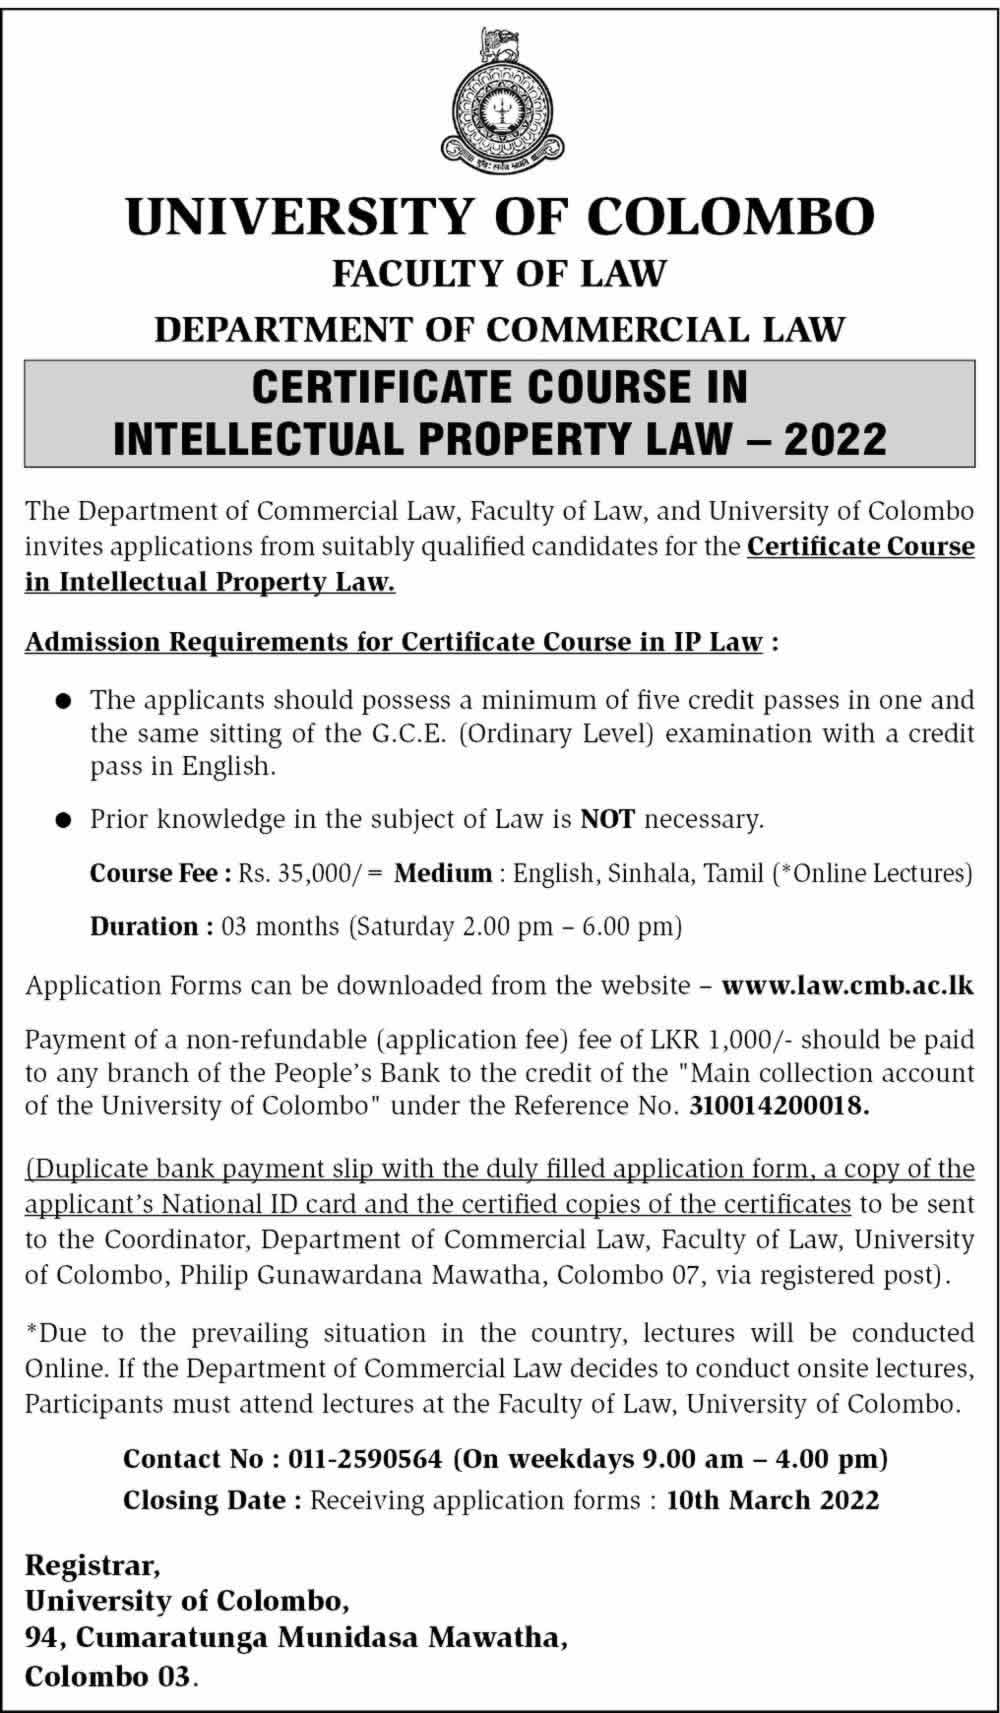 Certificate Course in Intellectual Property Law – 2022 by University of Colombo